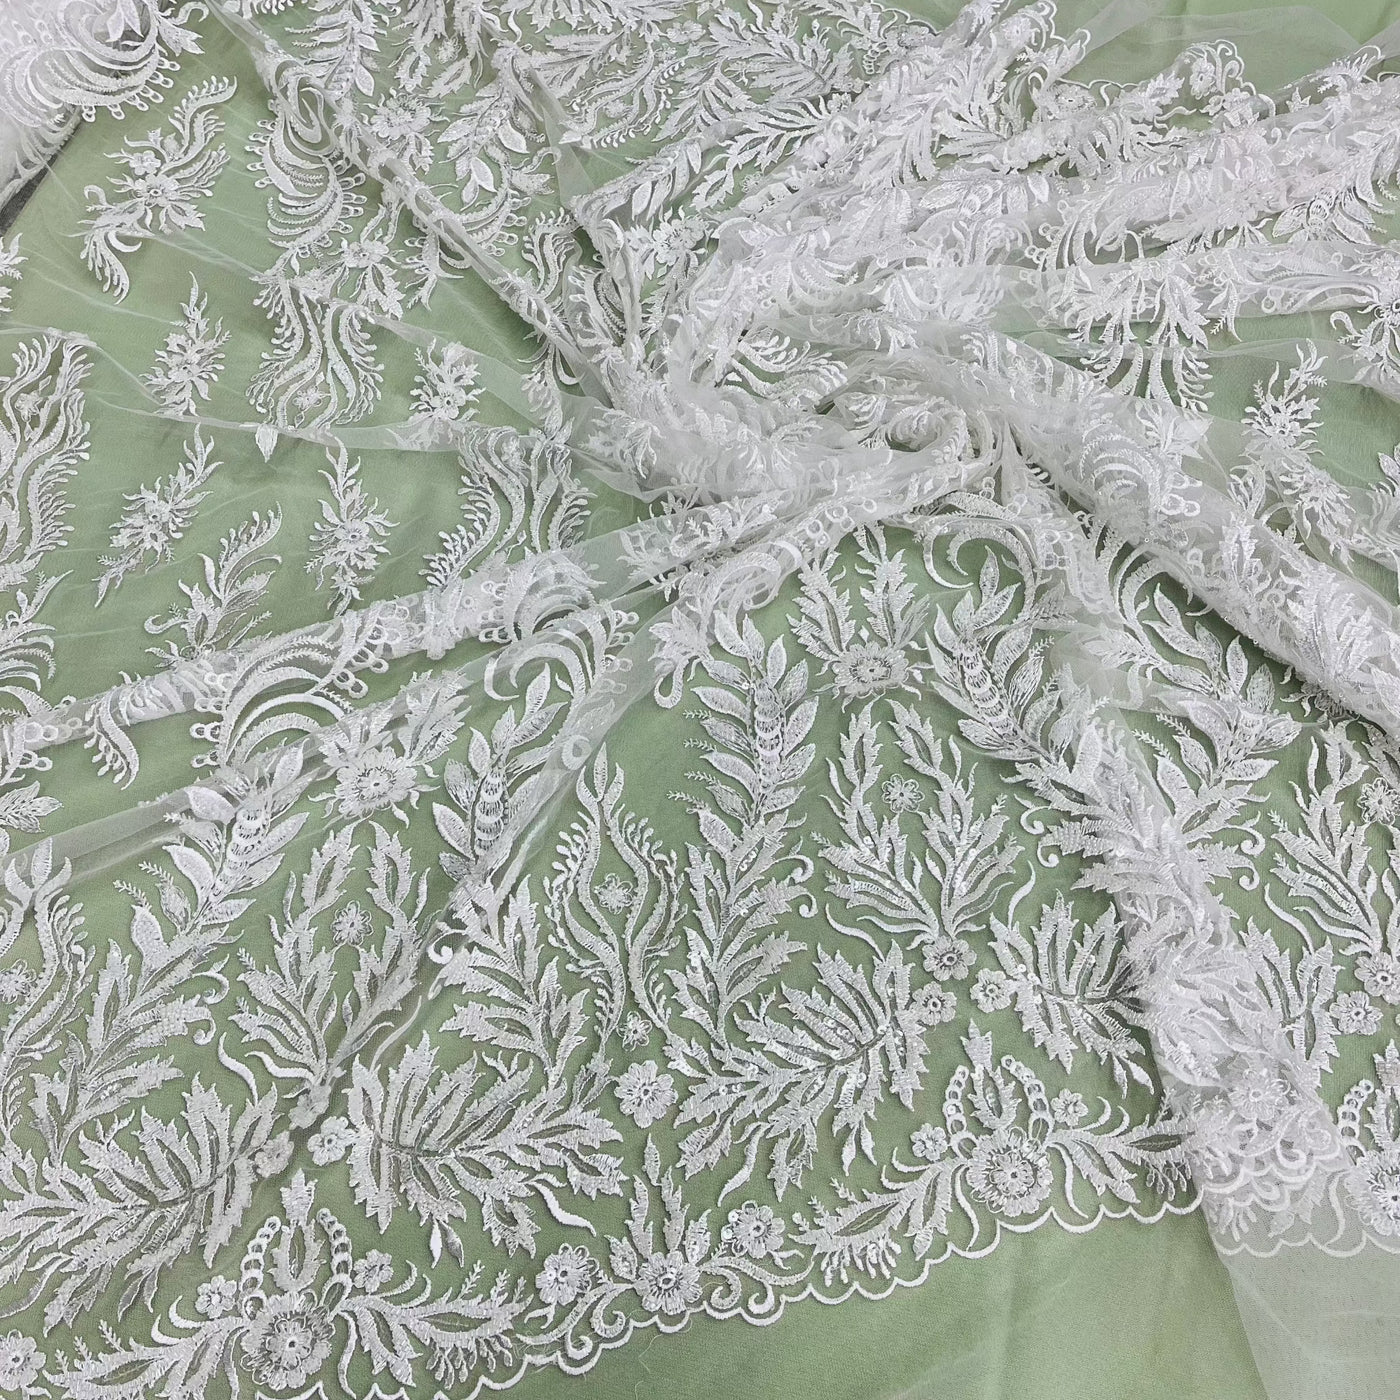 Beaded & Sequined Lace Fabric Embroidered on 100% Polyester Net Mesh | Lace USA - GD-13322 Ivory